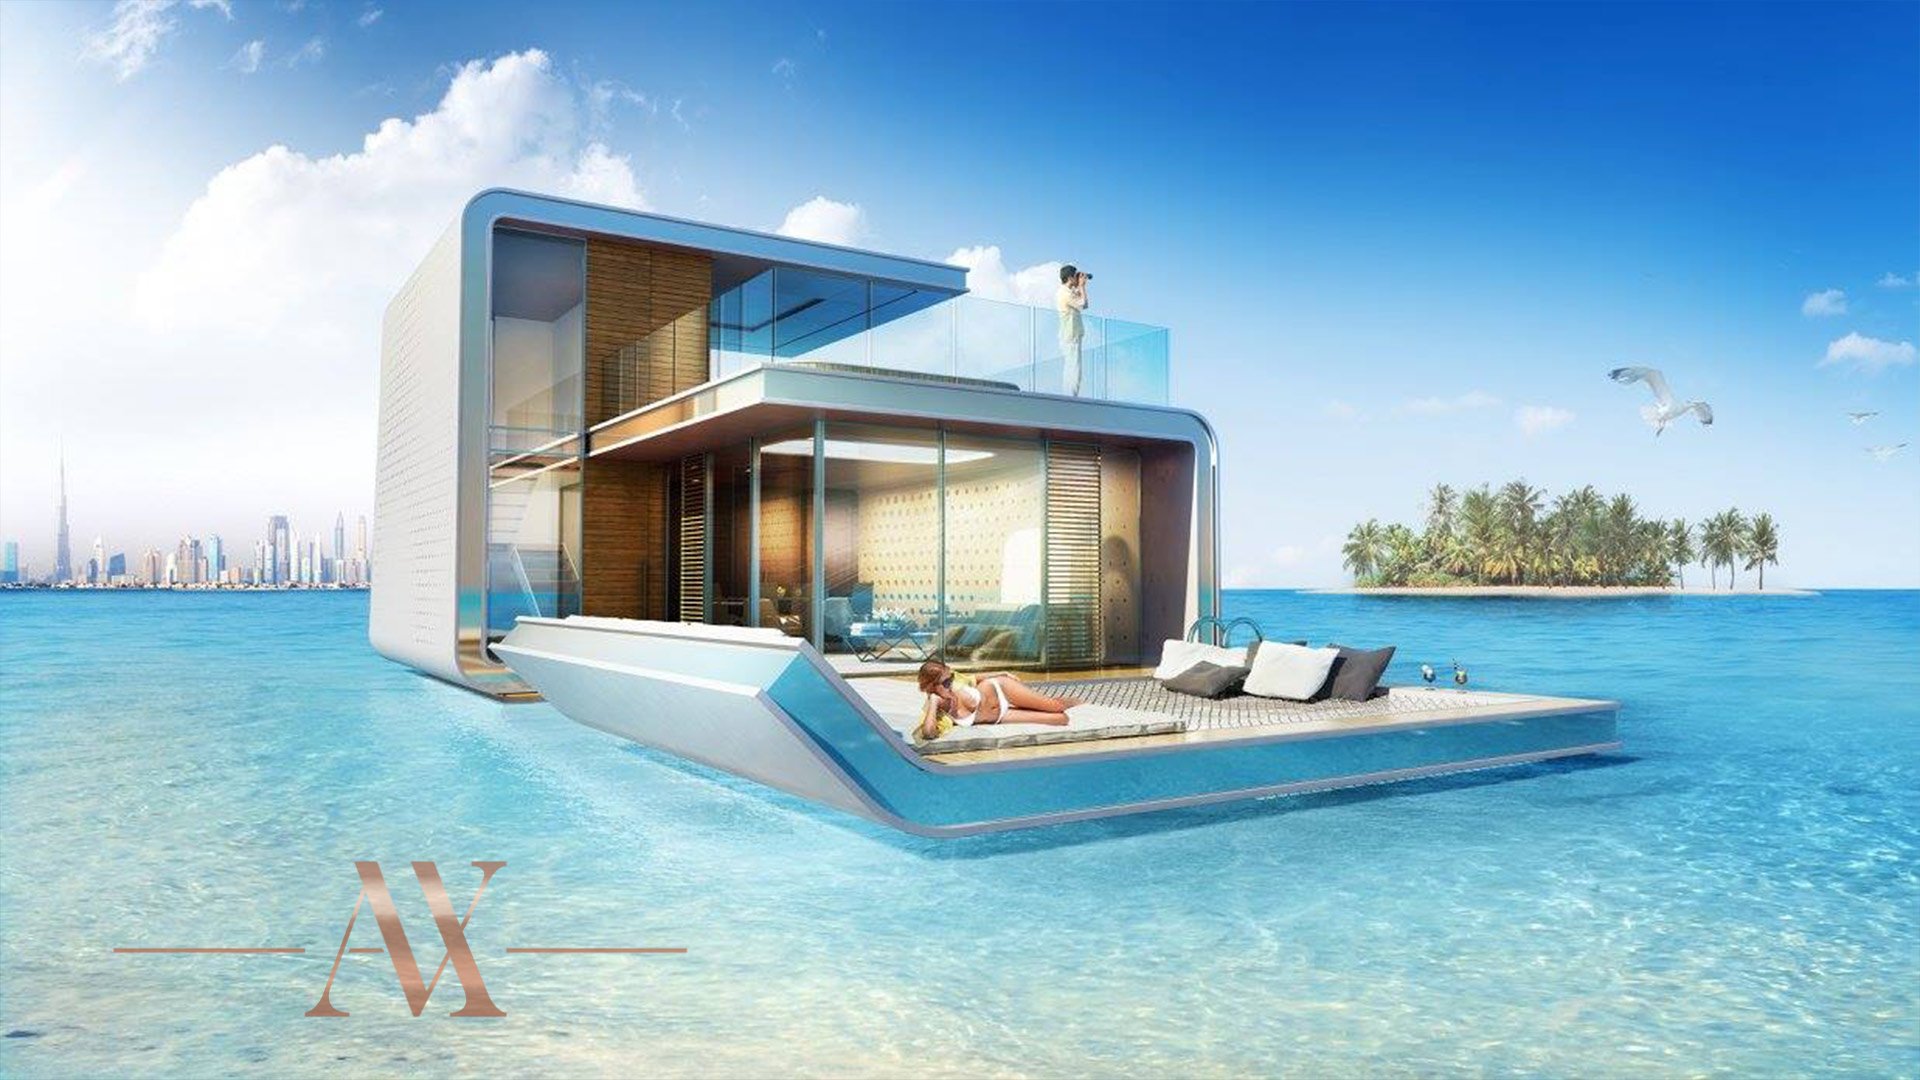 THE FLOATING SEAHORSE VILLAS by the sea - 1